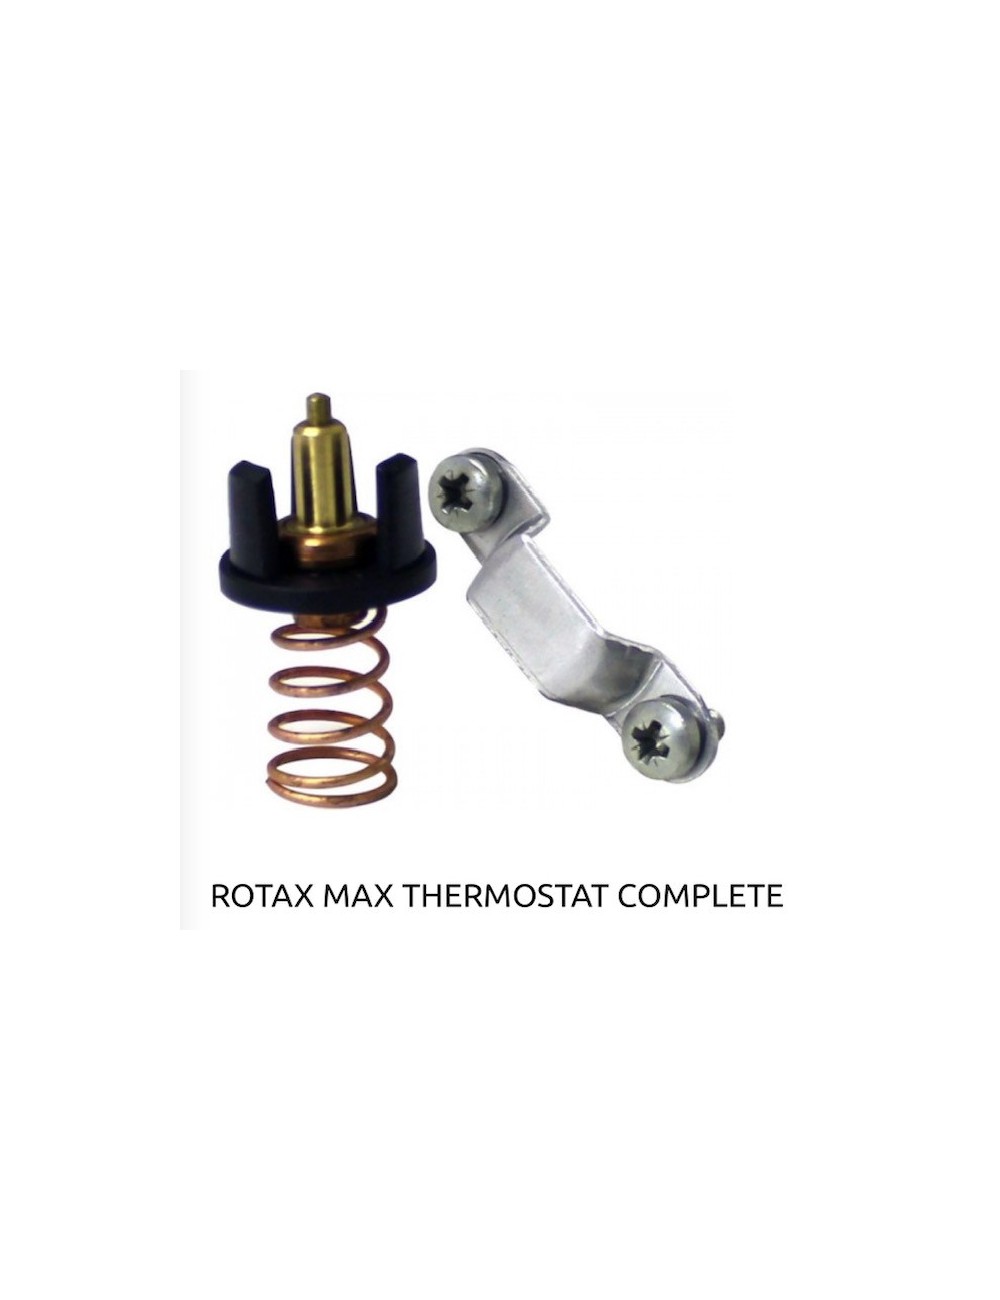 KIT THERMOSTAT COMPLET ROTAX MAX